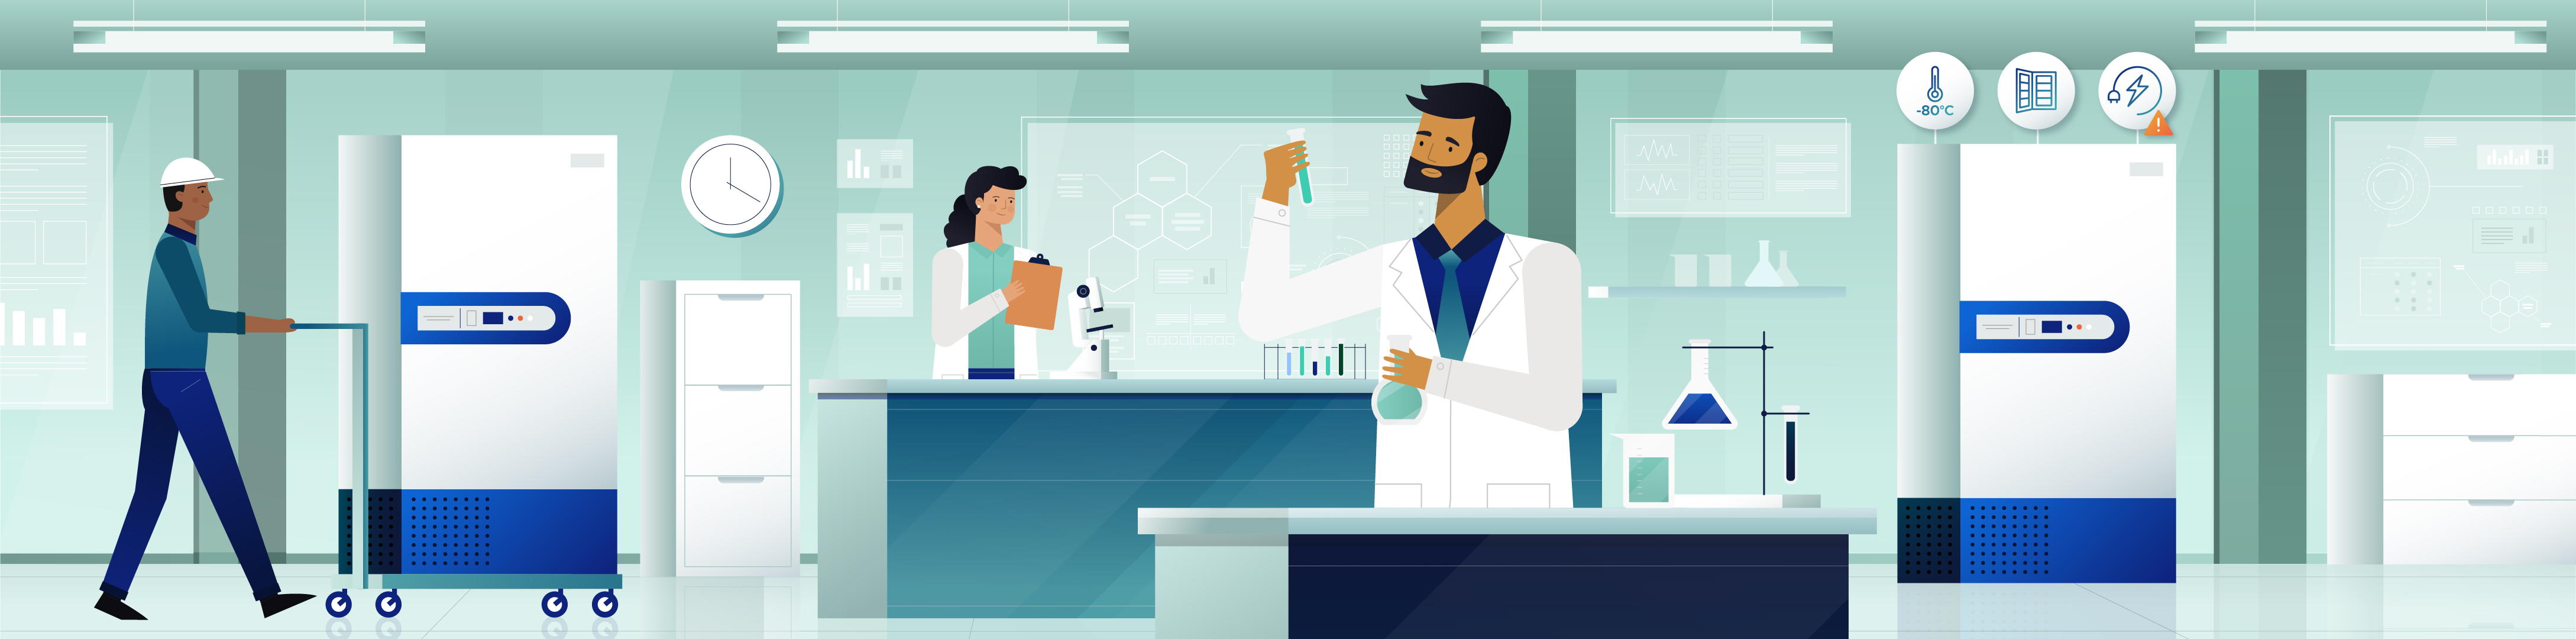 Illustration of the lab with scientist working.